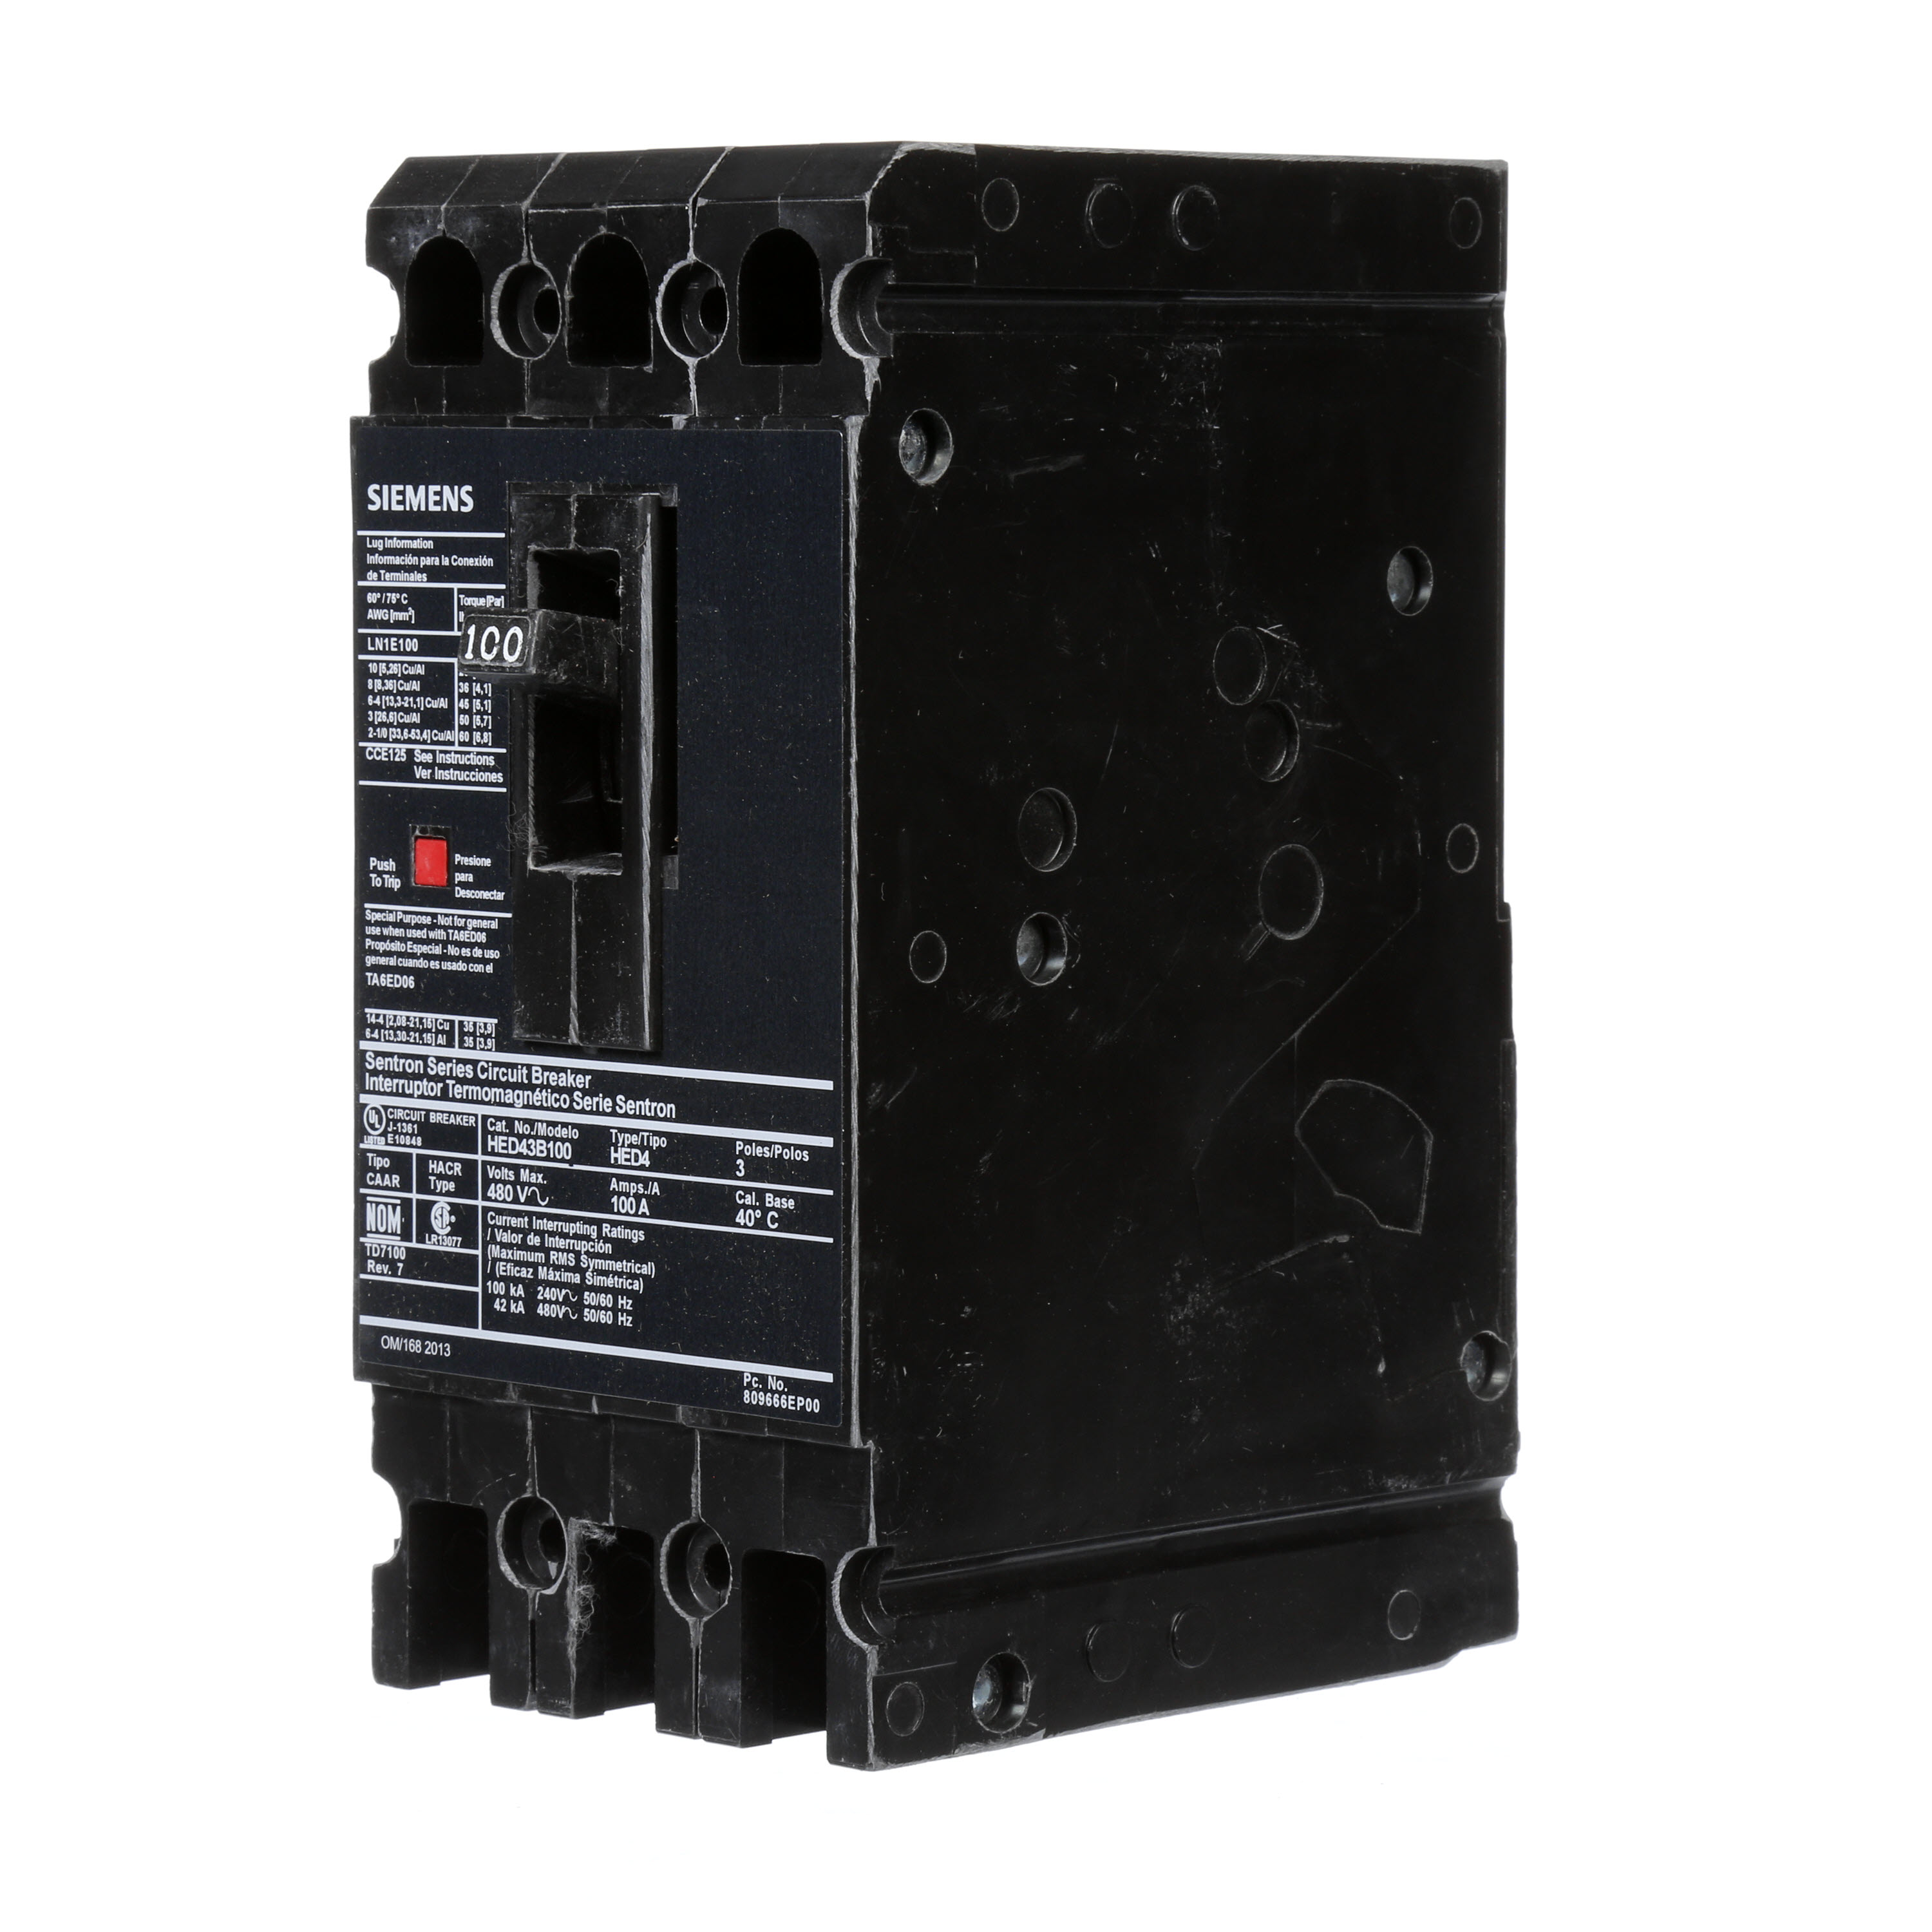 SIEMENS LOW VOLTAGE SENTRON MOLDED CASE CIRCUIT BREAKER WITH THERMAL - MAGNETICTRIP UNIT. STANDARD 40 DEG C BREAKER ED FRAME WITH HIGH BREAKING CAPACITY. 100A3-POLE (42KAIC AT 480V). NON-INTERCHANGEABLE TRIP UNIT. SPECIAL FEATURES LOAD LUGS ONLY (LN1E100) WIRE RANGE 10 - 1/0AWG (CU/AL). DIMENSIONS (W x H x D) IN 3.00 x 6.4 x 3.92.